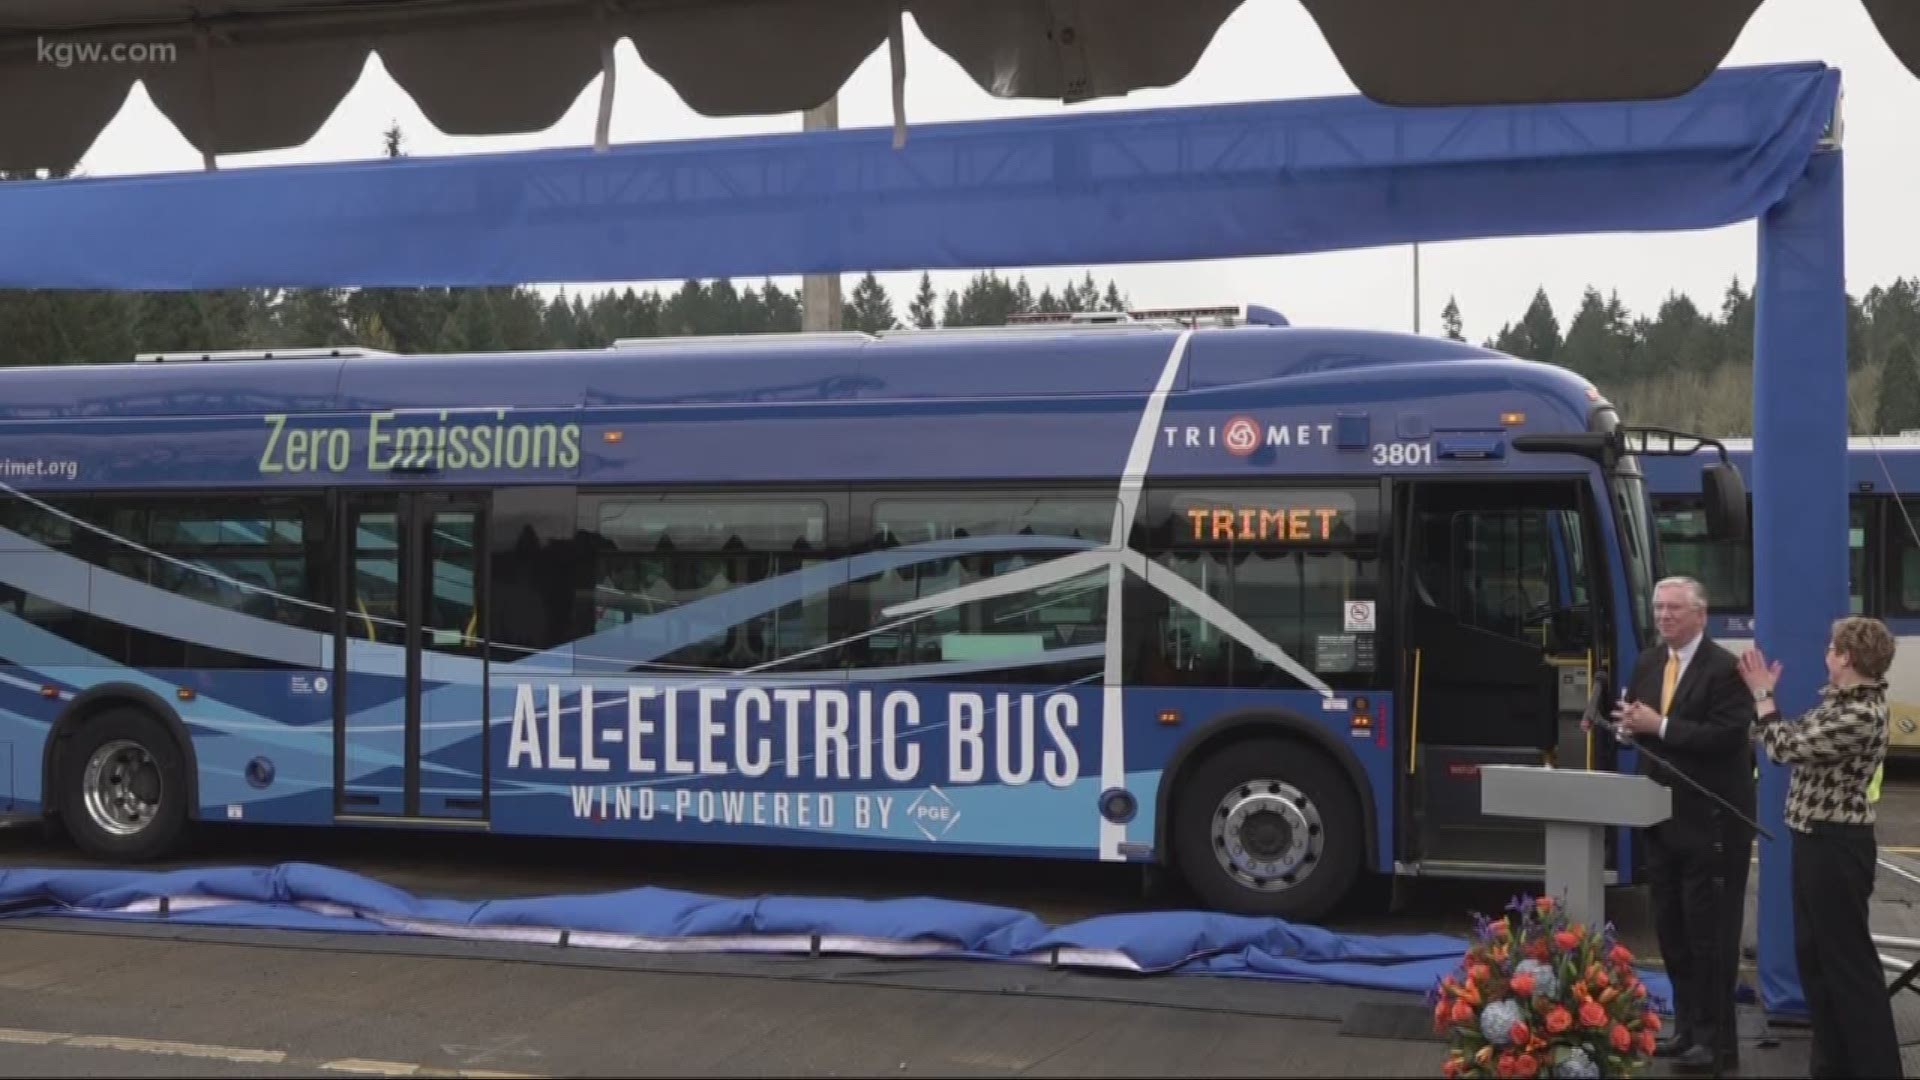 TriMet has unveiled all-electric buses.